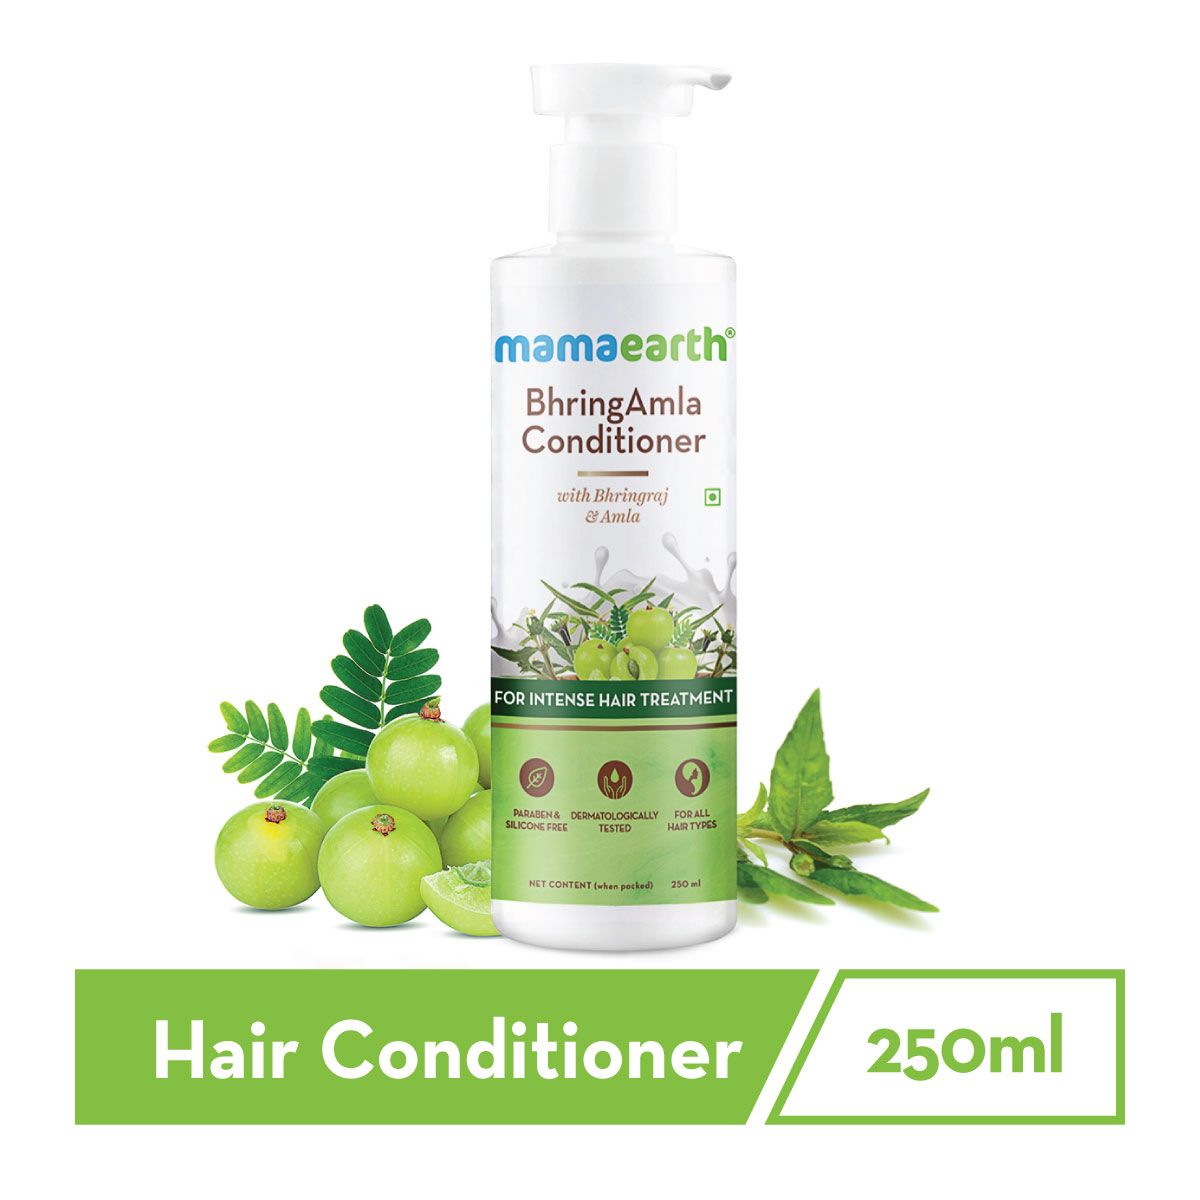 Mamaearth BhringAmla Conditioner Better Than Others Available In The Market